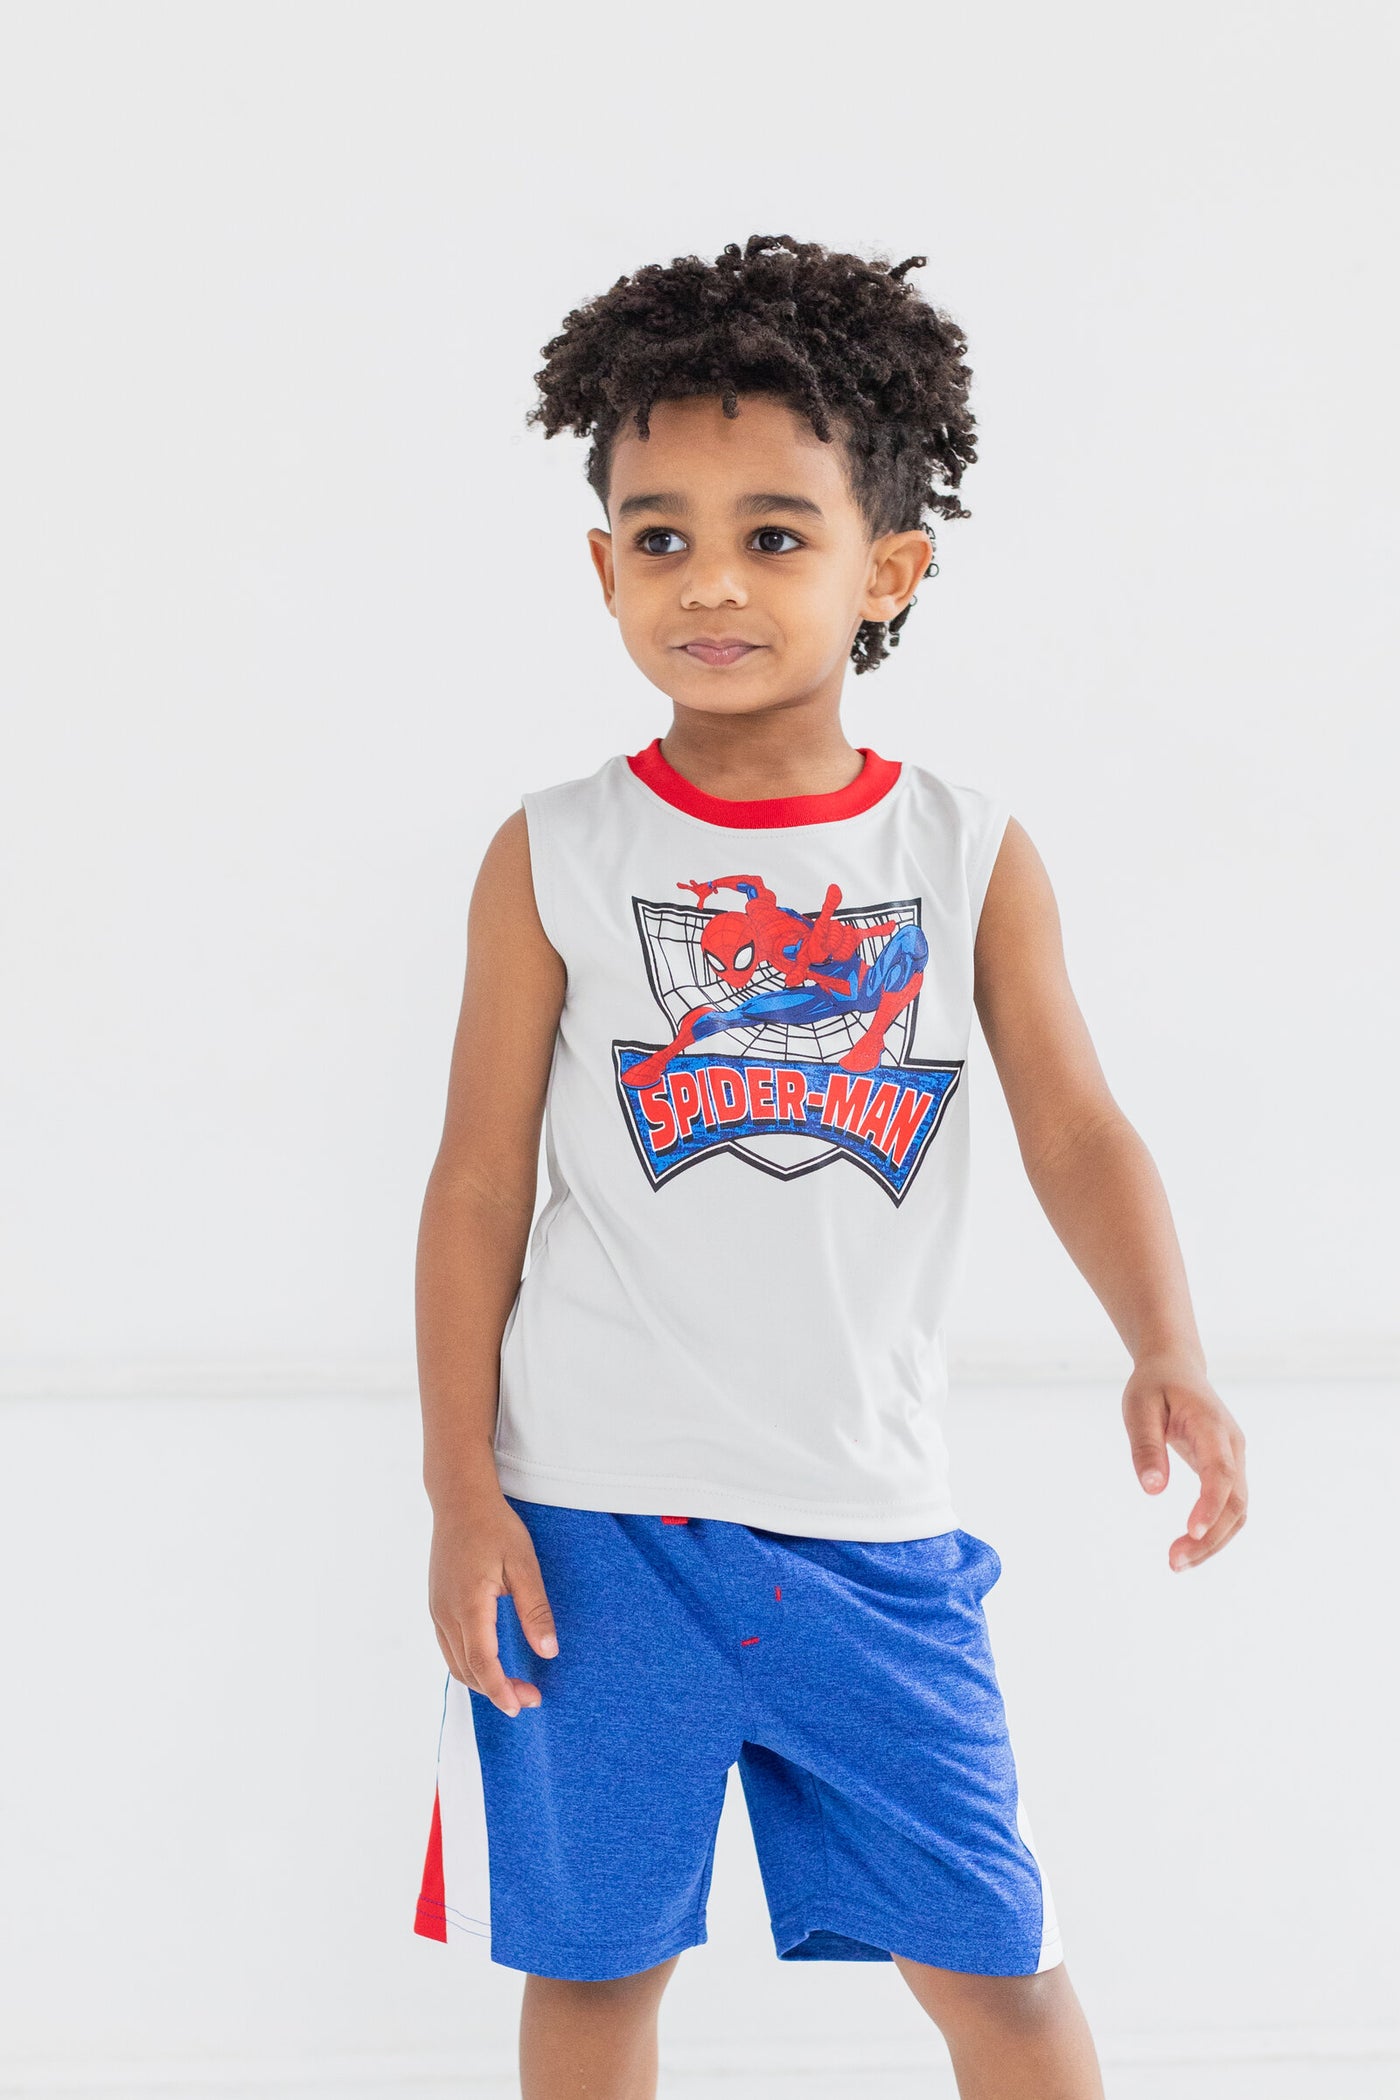 Marvel Spider-Man T-Shirt Tank Top and Shorts 3 Piece Outfit Set Toddler to Big Kid